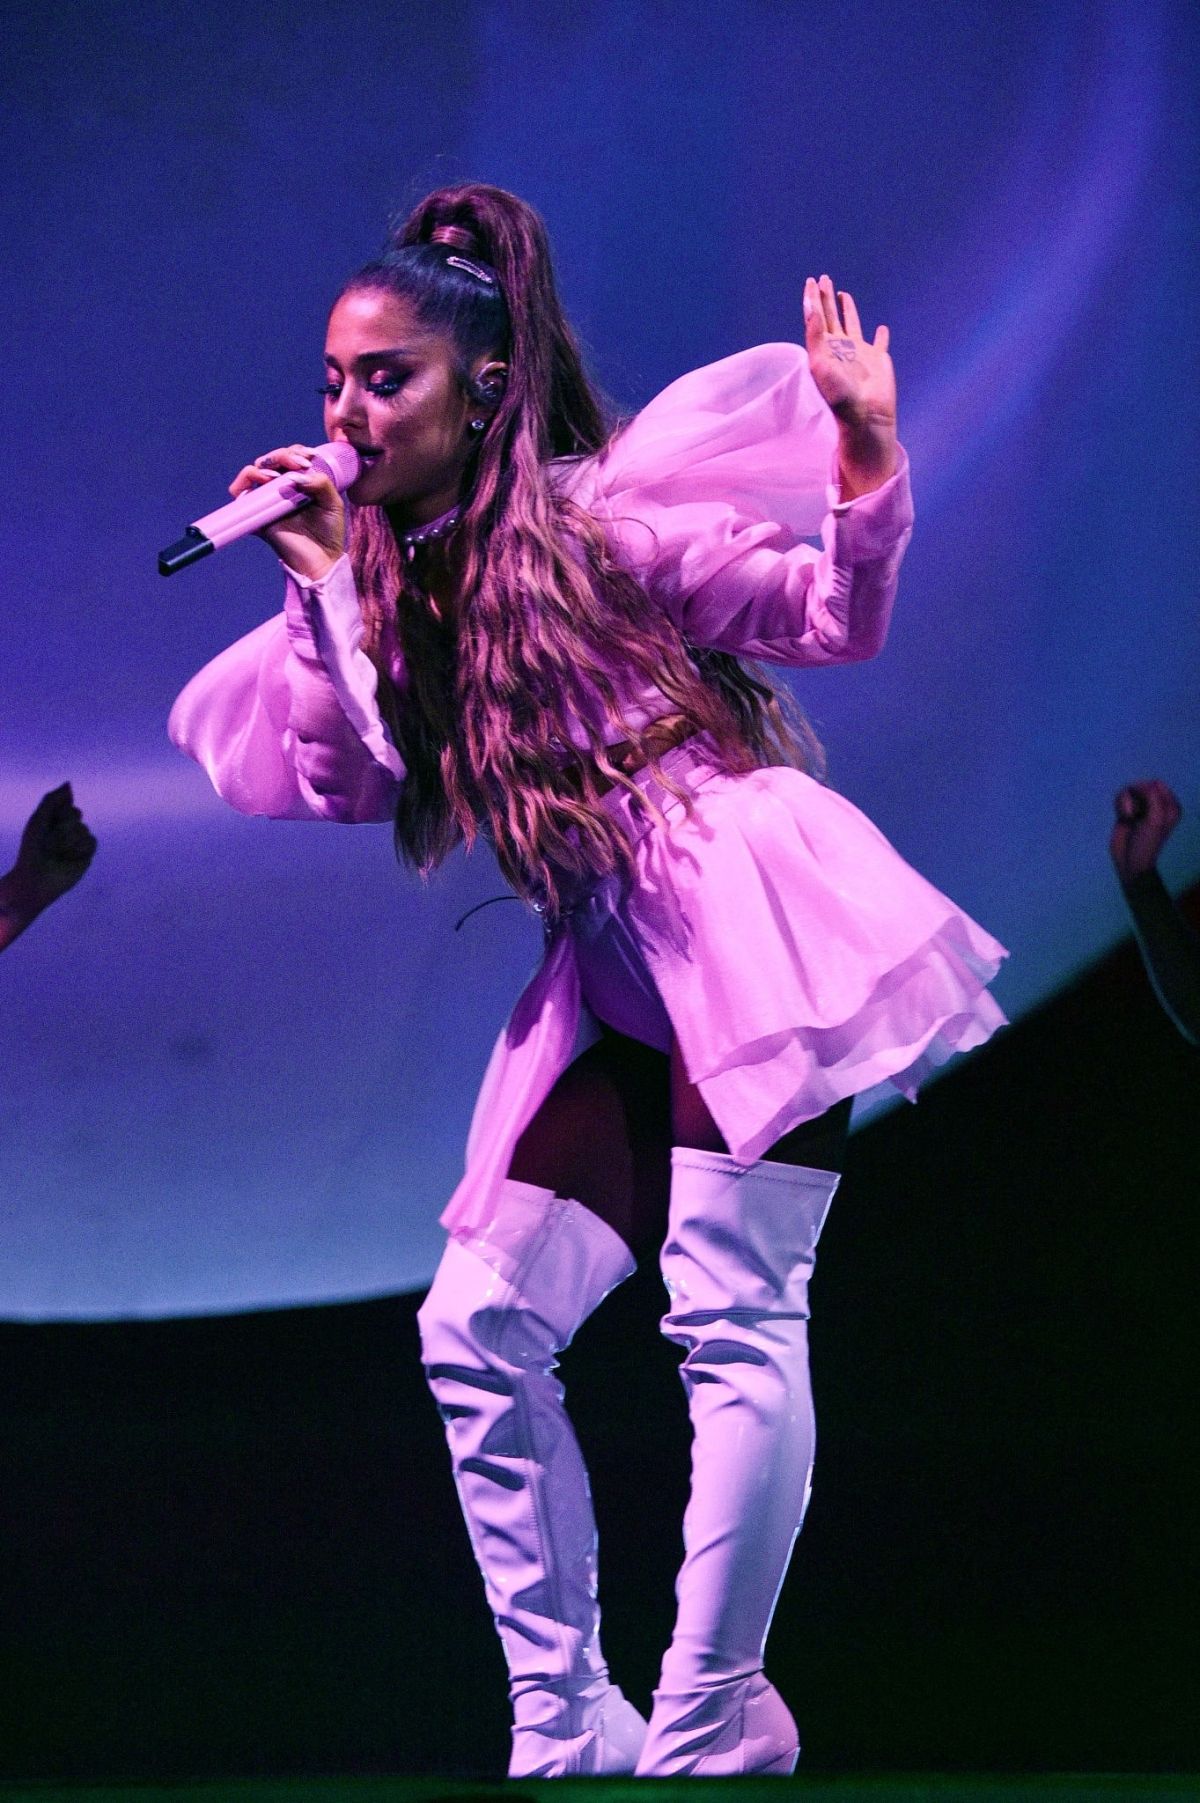 ariana-grande-performs-at-final-night-of-lollapalooza-in-chicago-08-04-2019-22.jpg